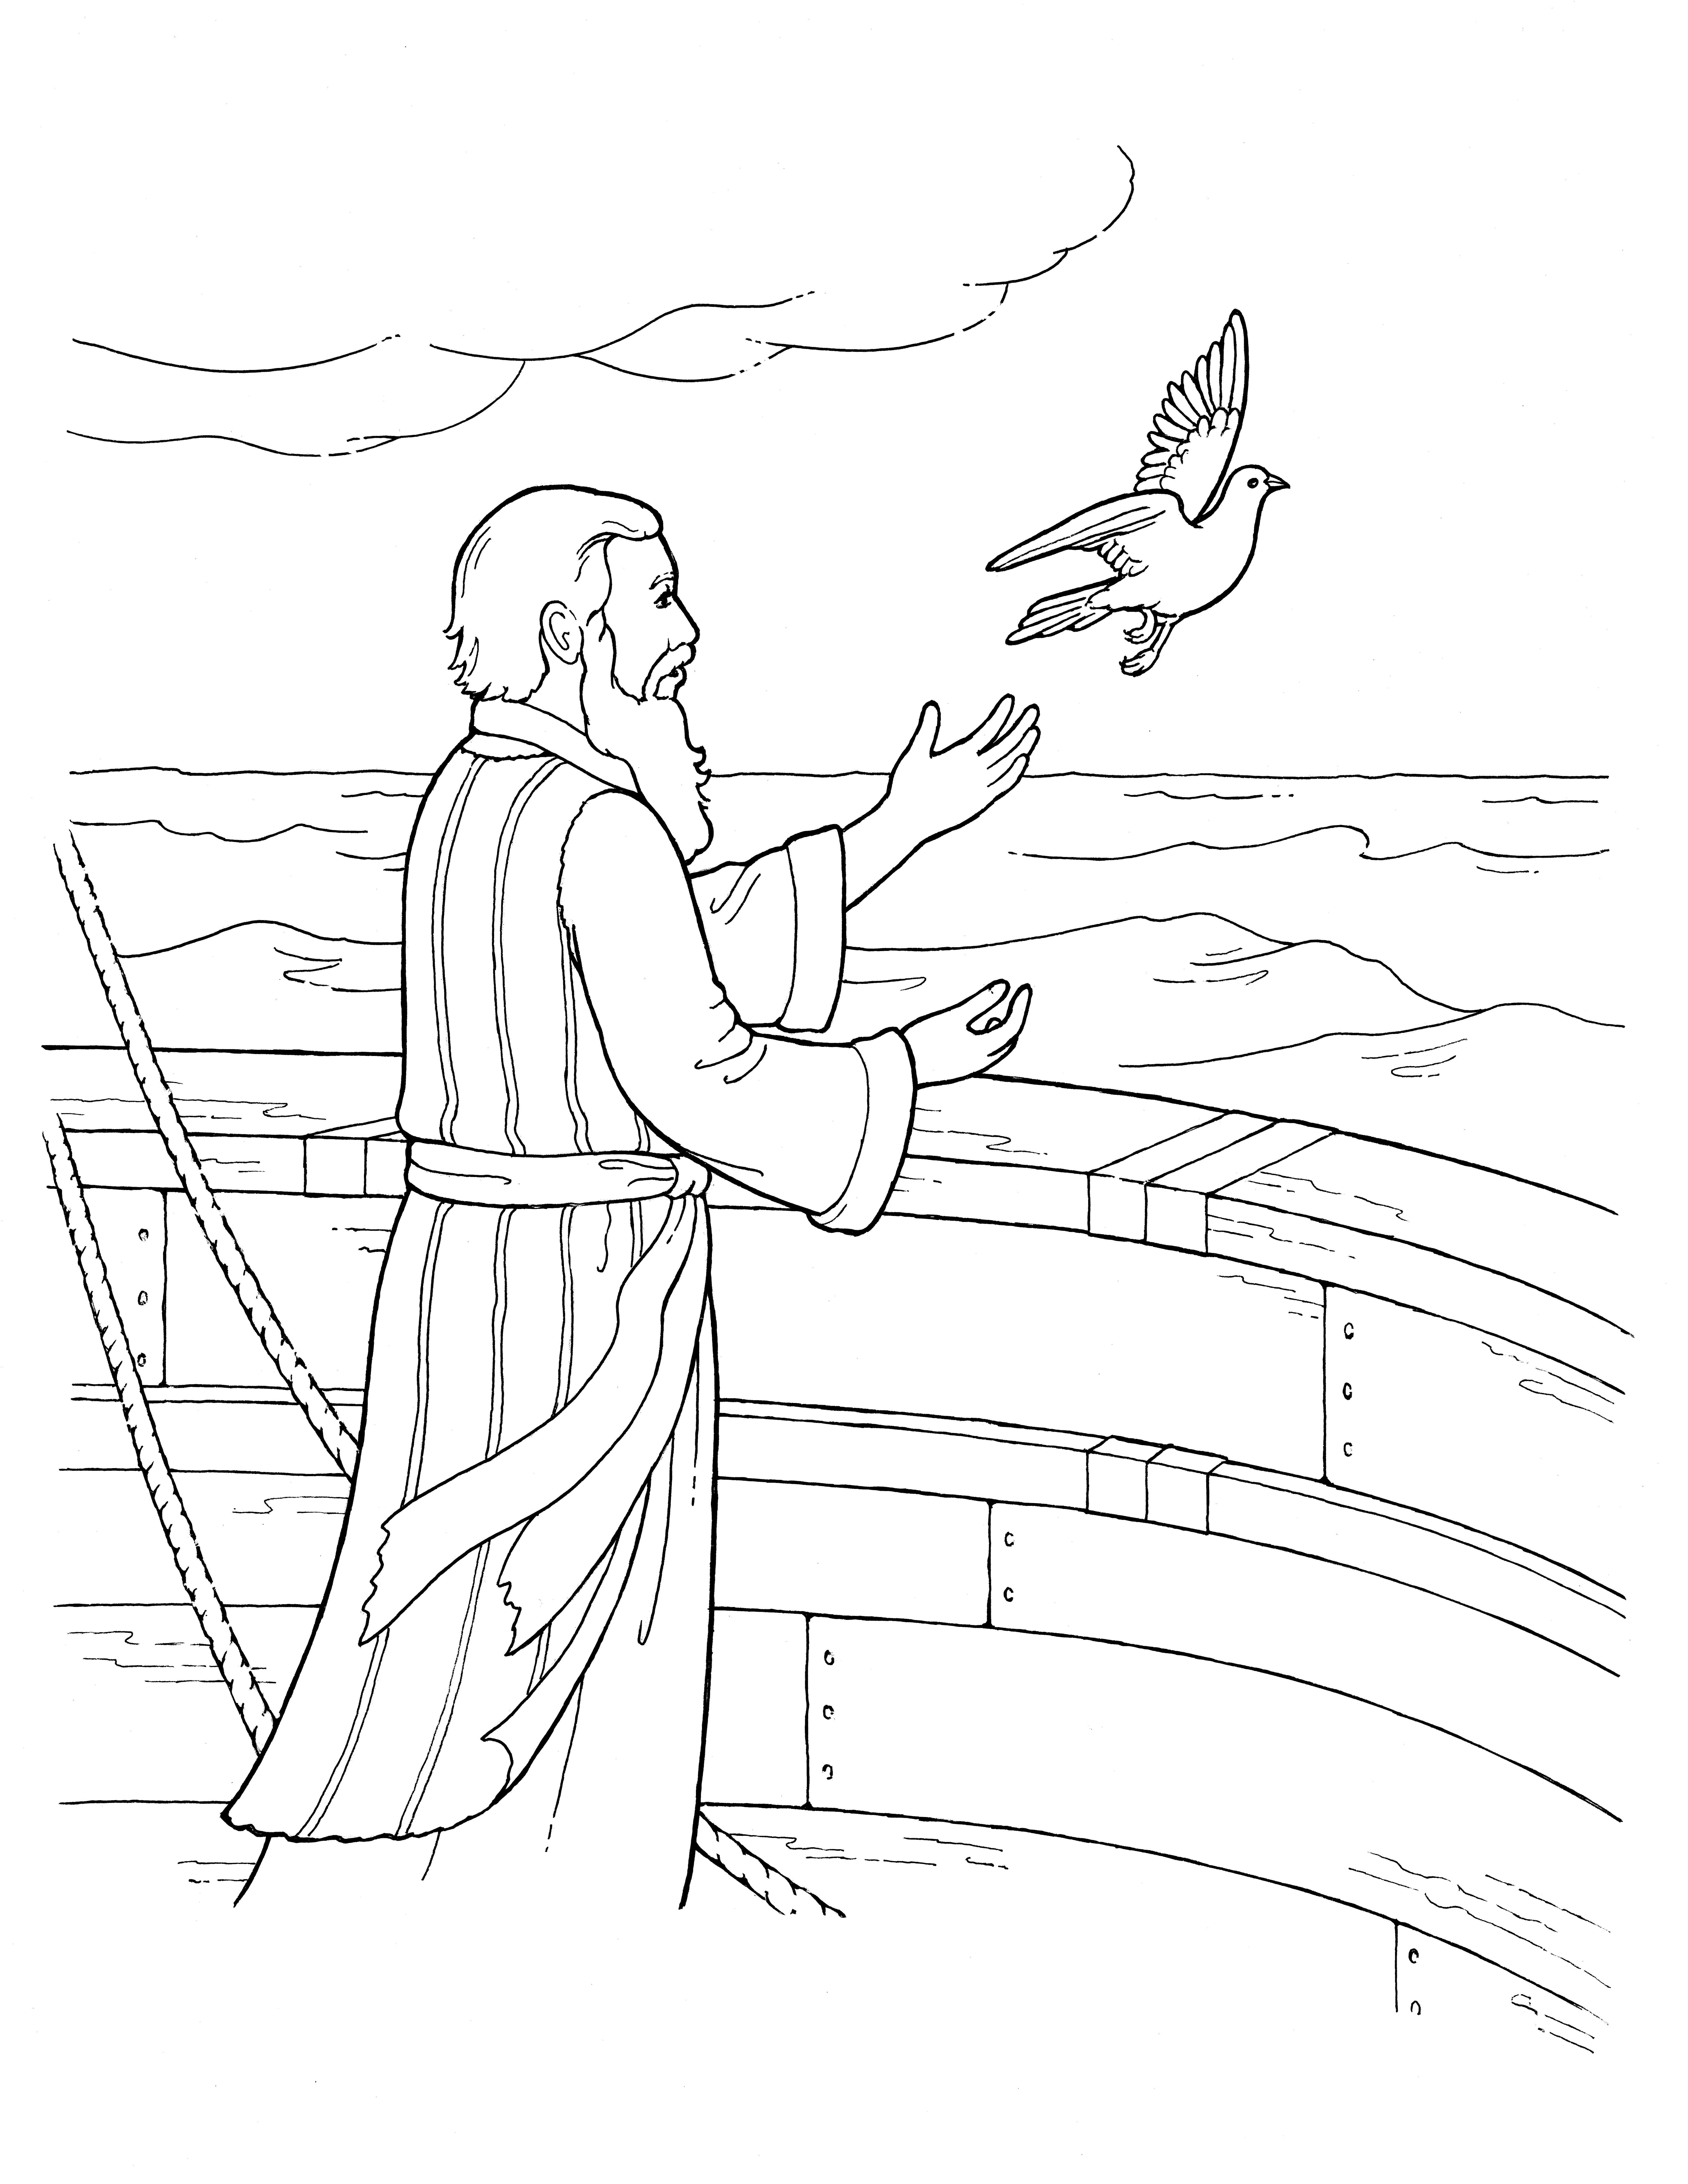 An illustration of Noah releasing the dove of peace from the ark.